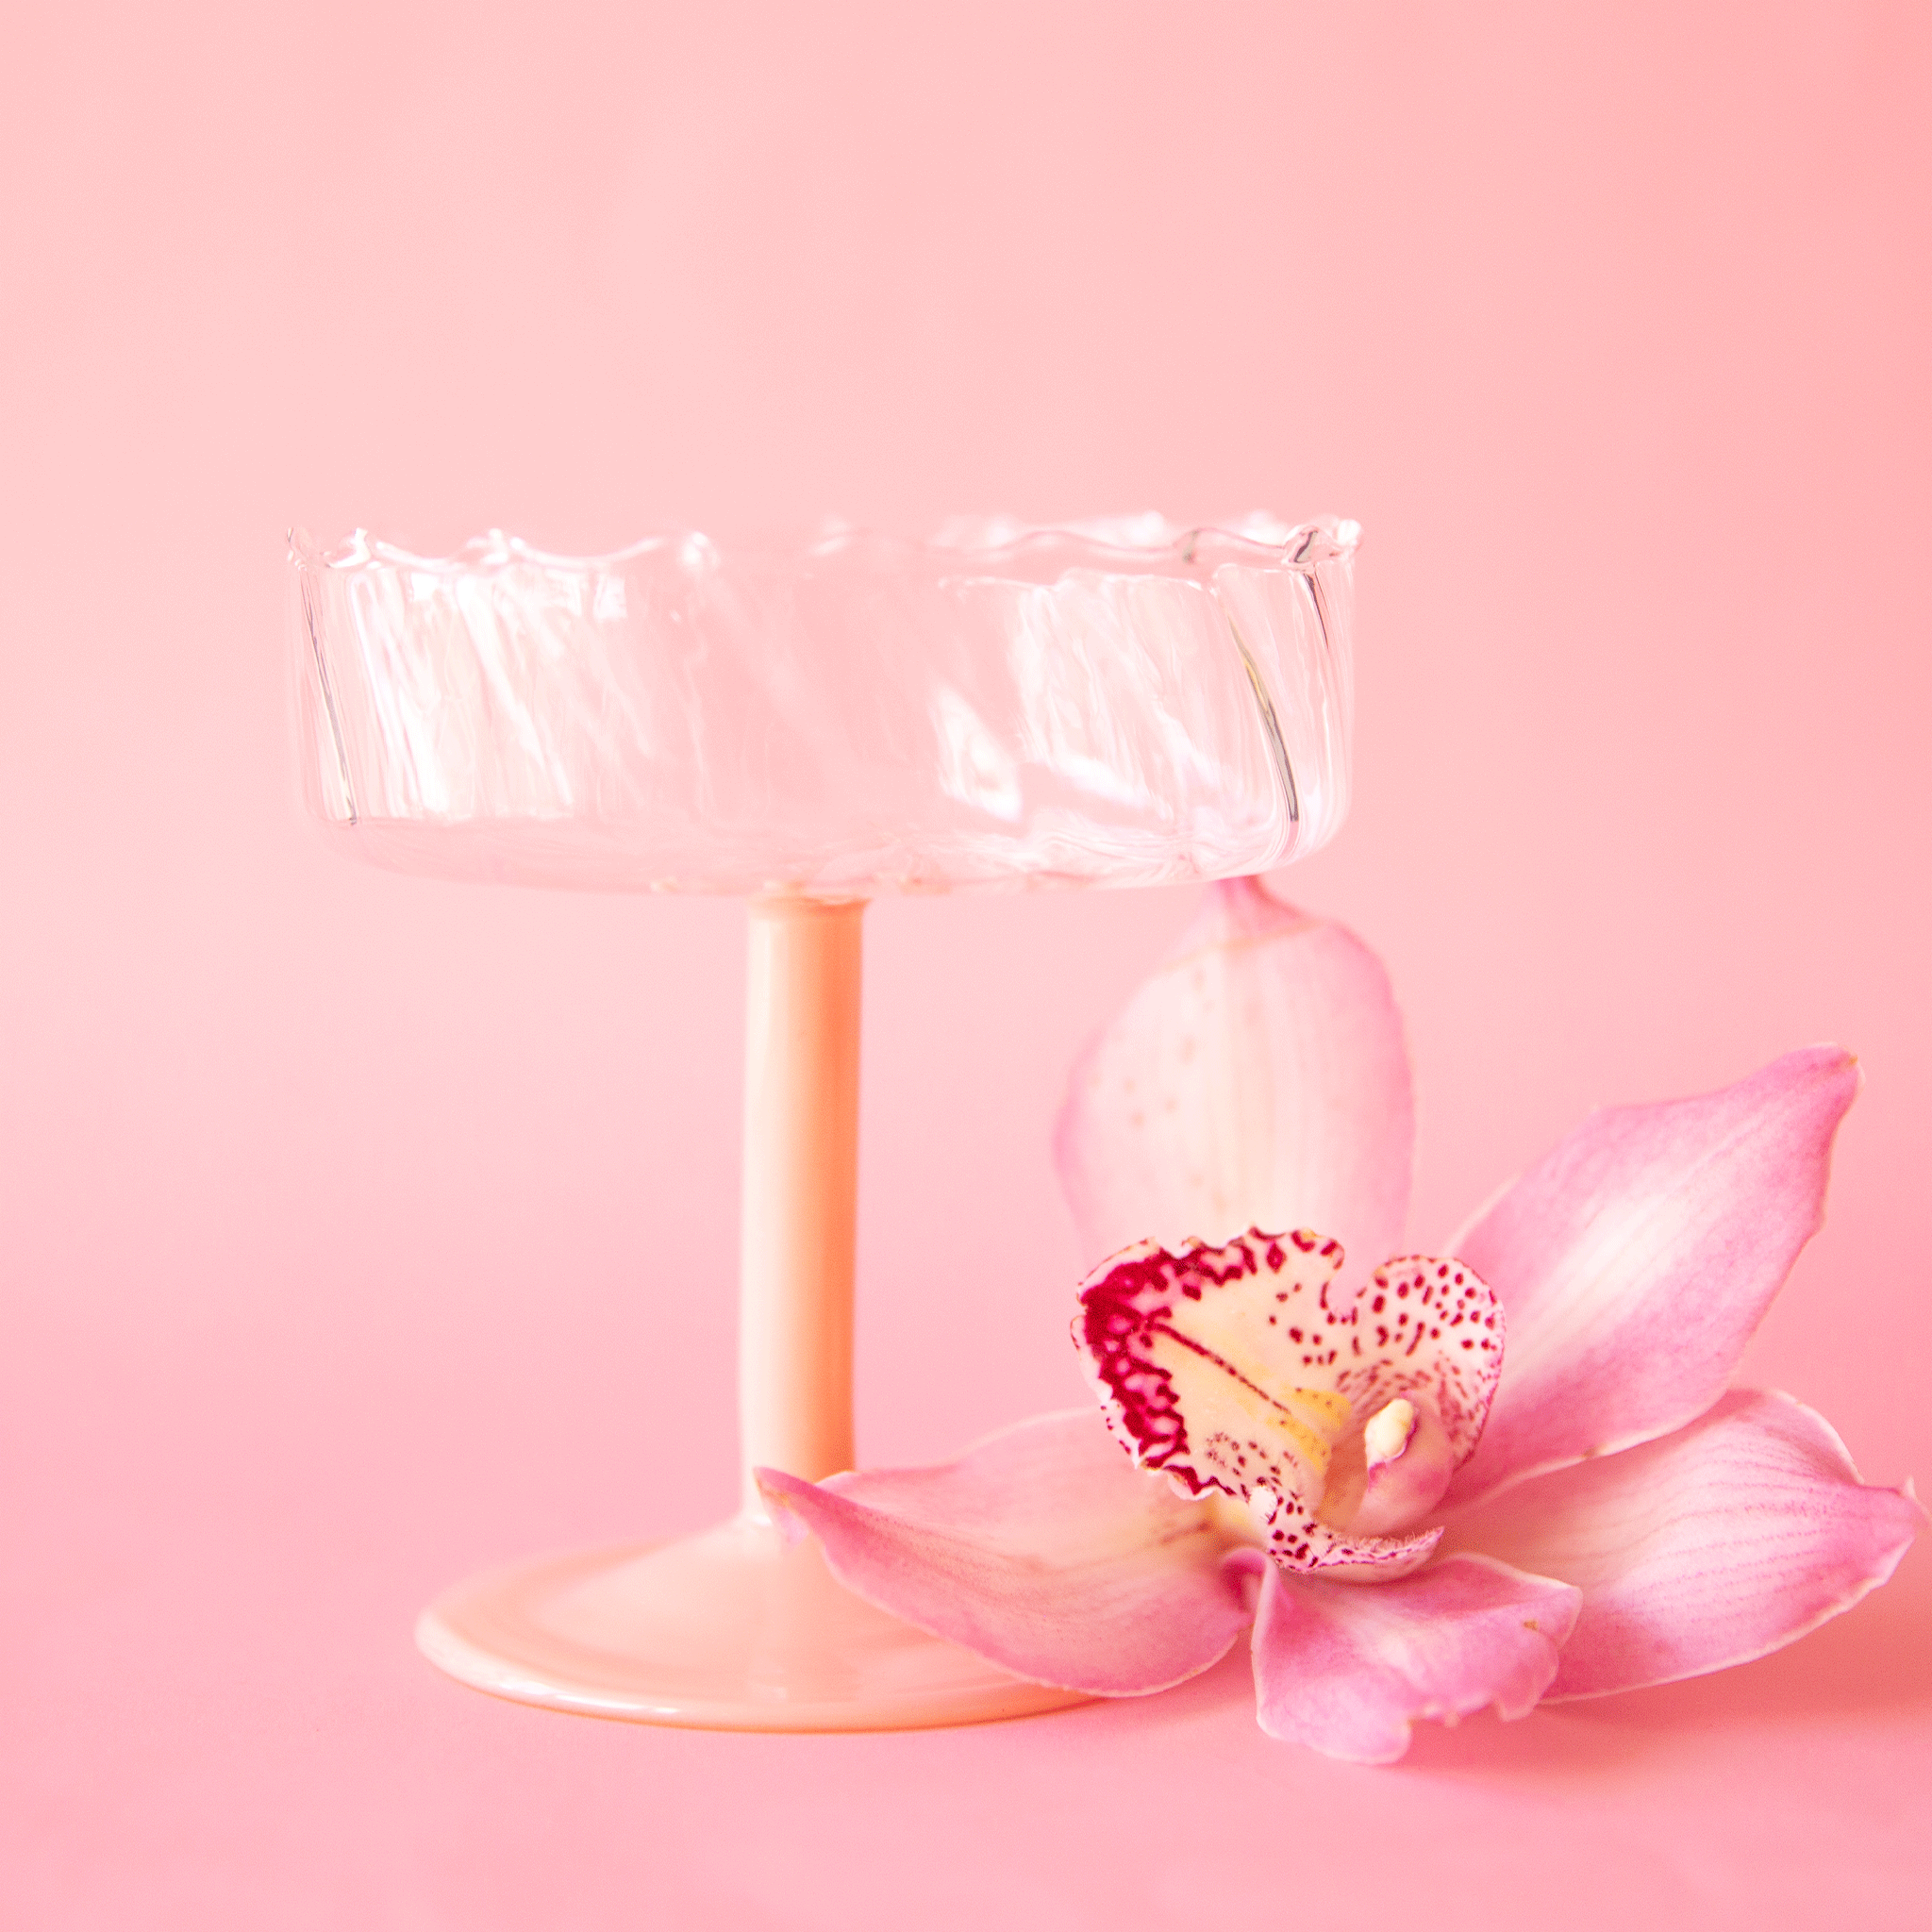 On a pink background is a wavy glass coupe with a pink stem. 